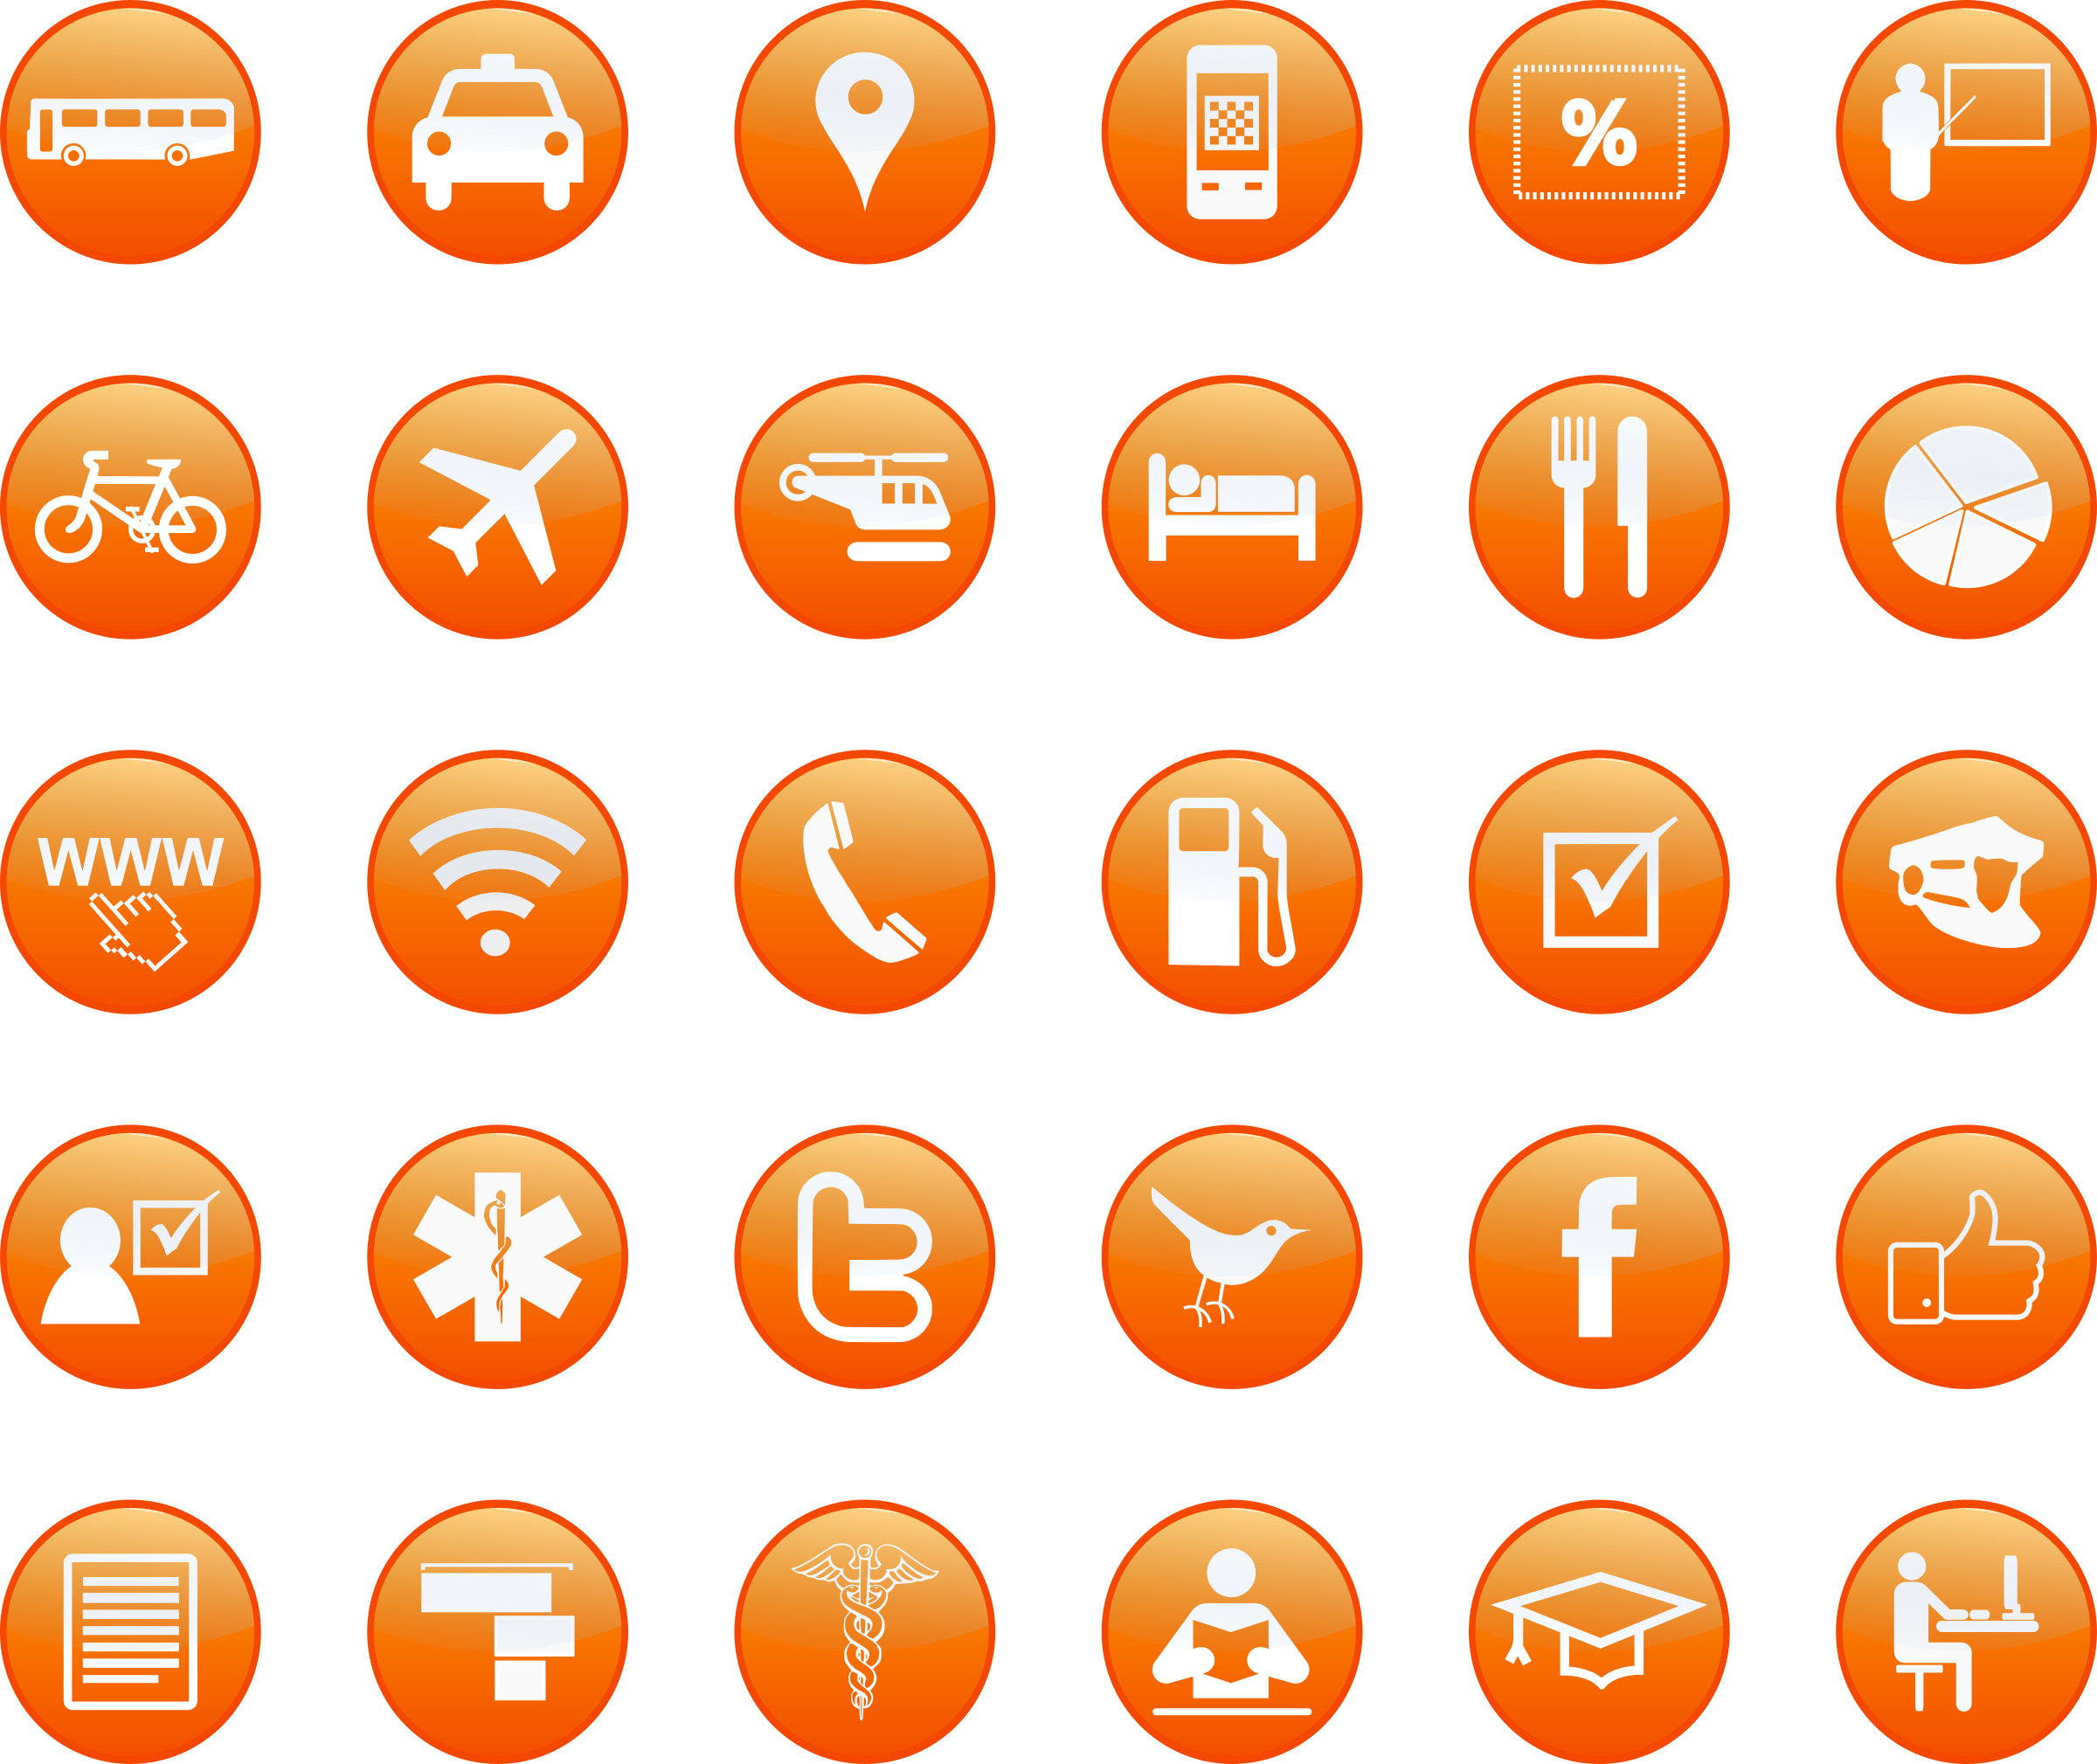 Tourism And Services Buttons - Free Tourism Icons (2400x2019)